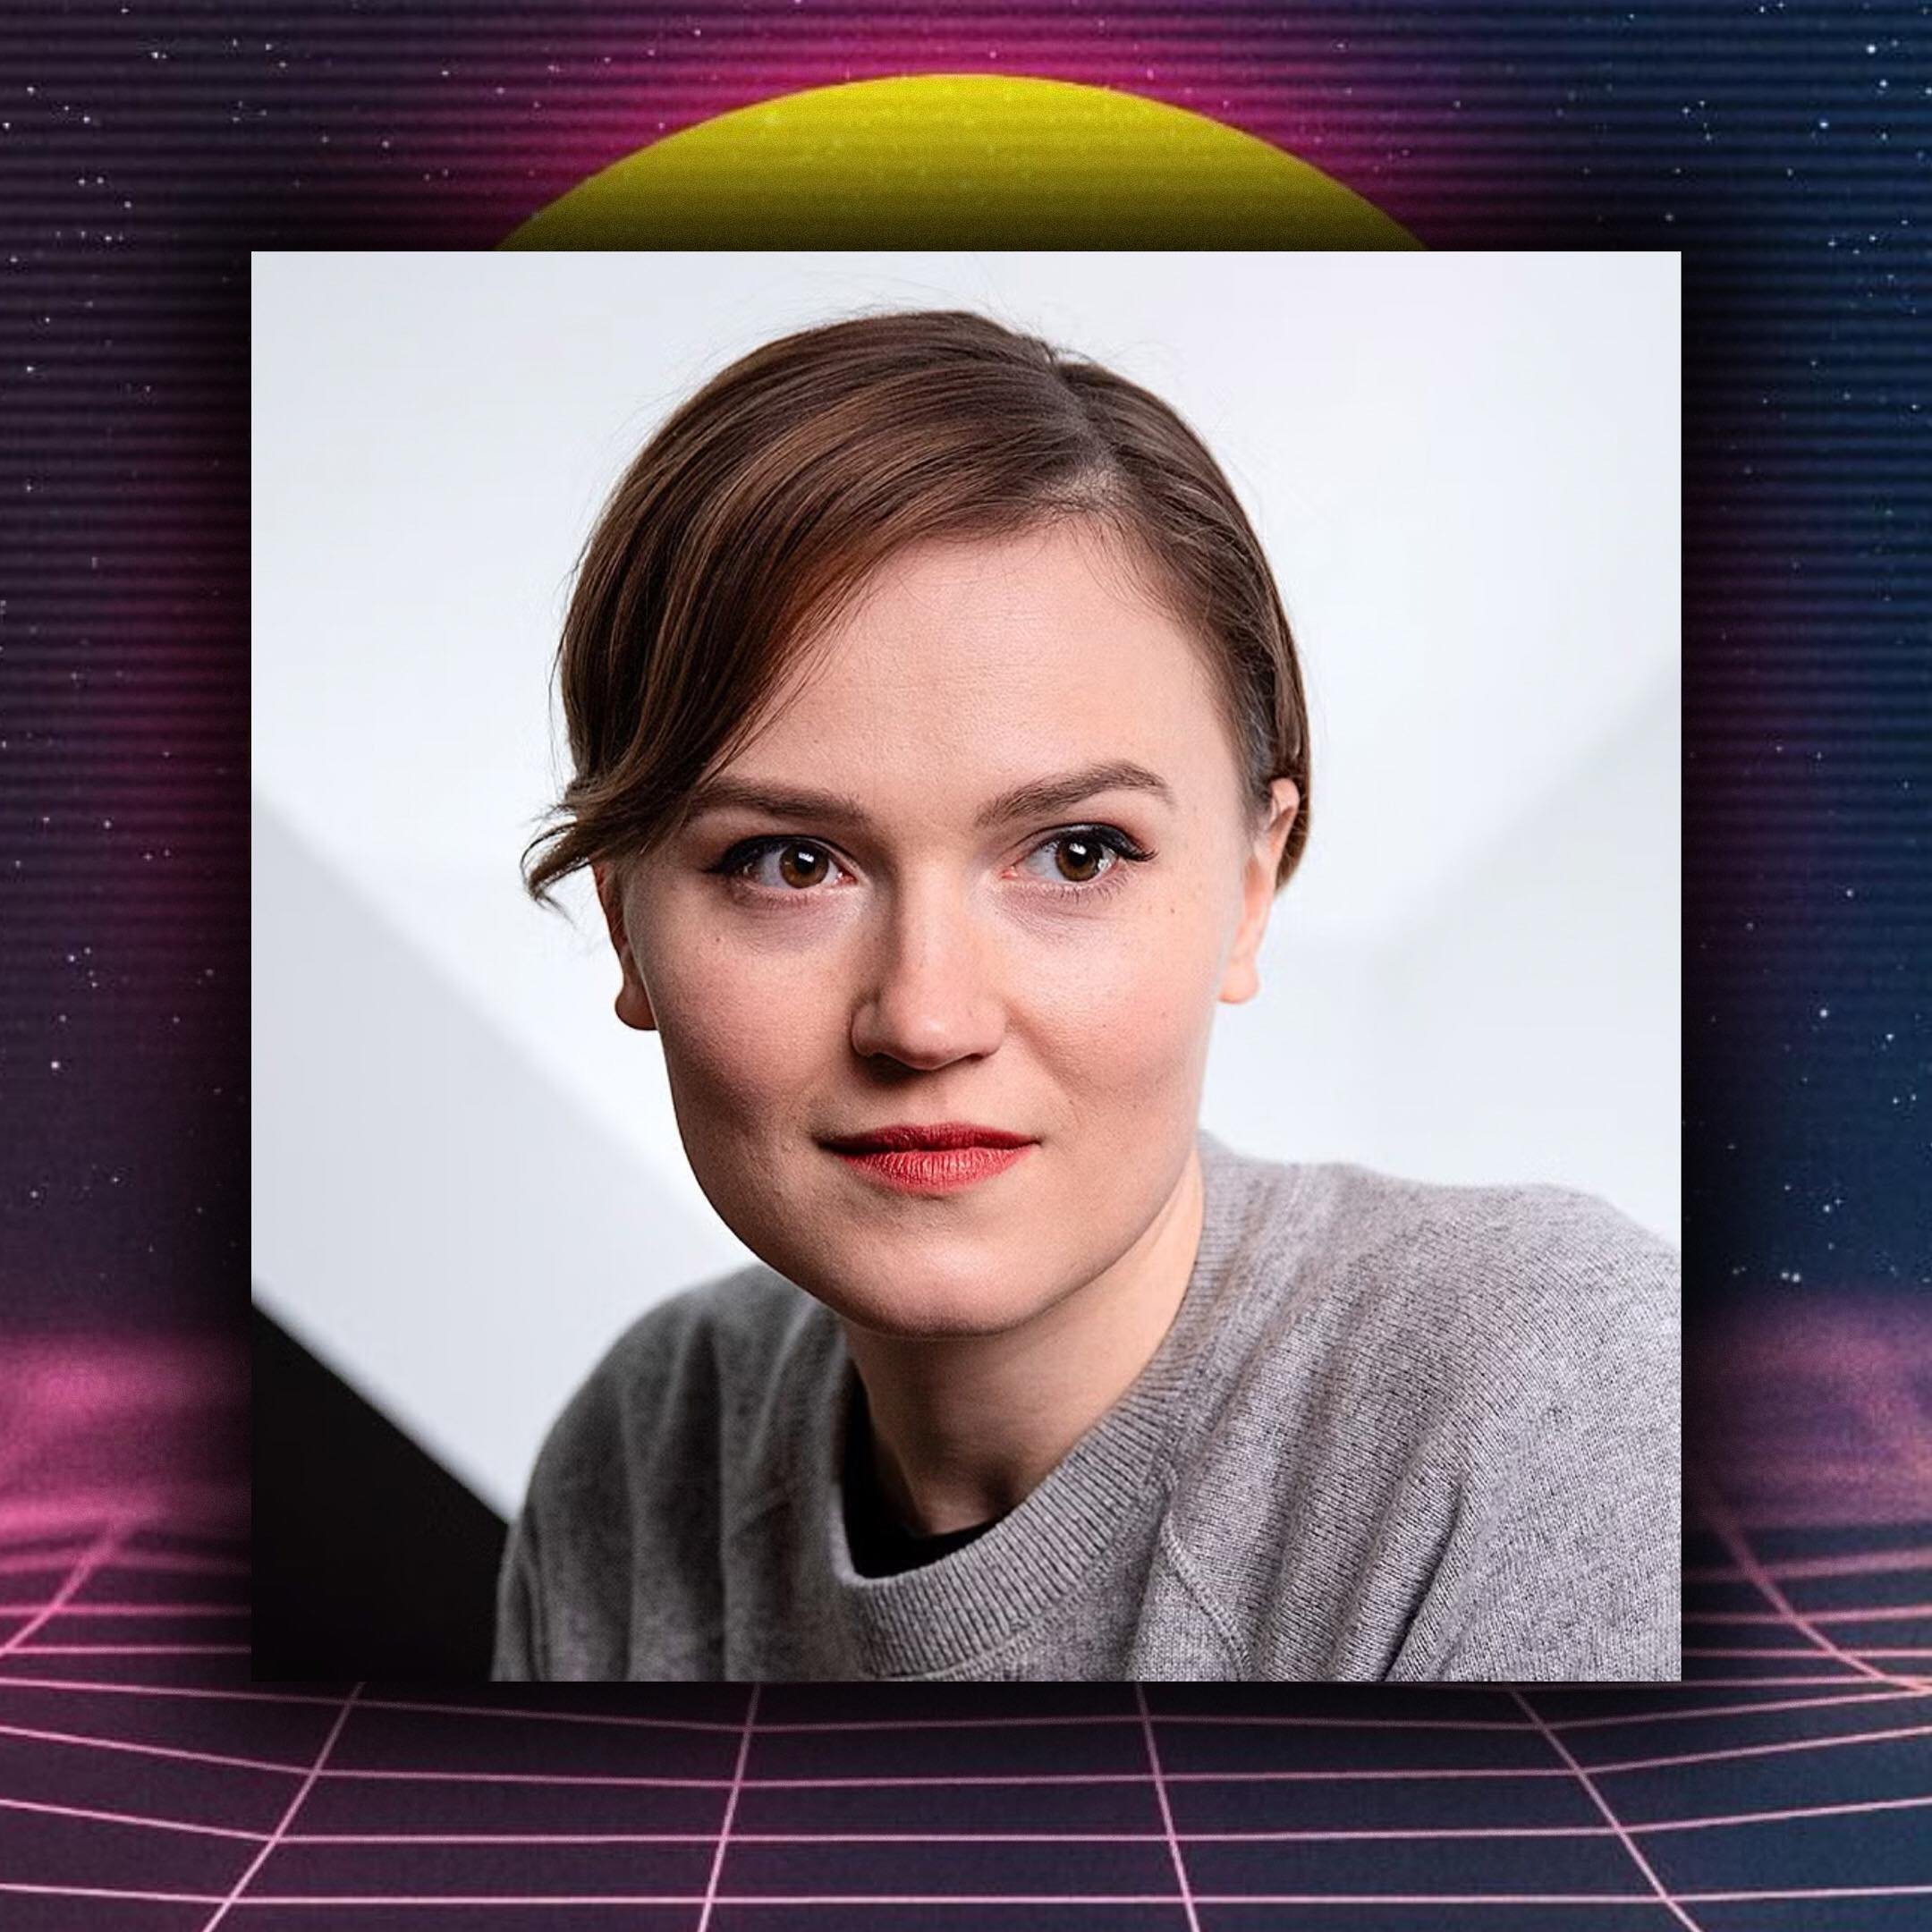 NEW INTERVIEW INCOMING! Ep. 104 of @sffaddictspod airs on Tuesday, with my co-host @mjkuhnbooks and I interviewing bestselling author @veronicaroth about her new novella When Among Crows, dystopias, Slavic folklore, The Witcher, publishing and much m